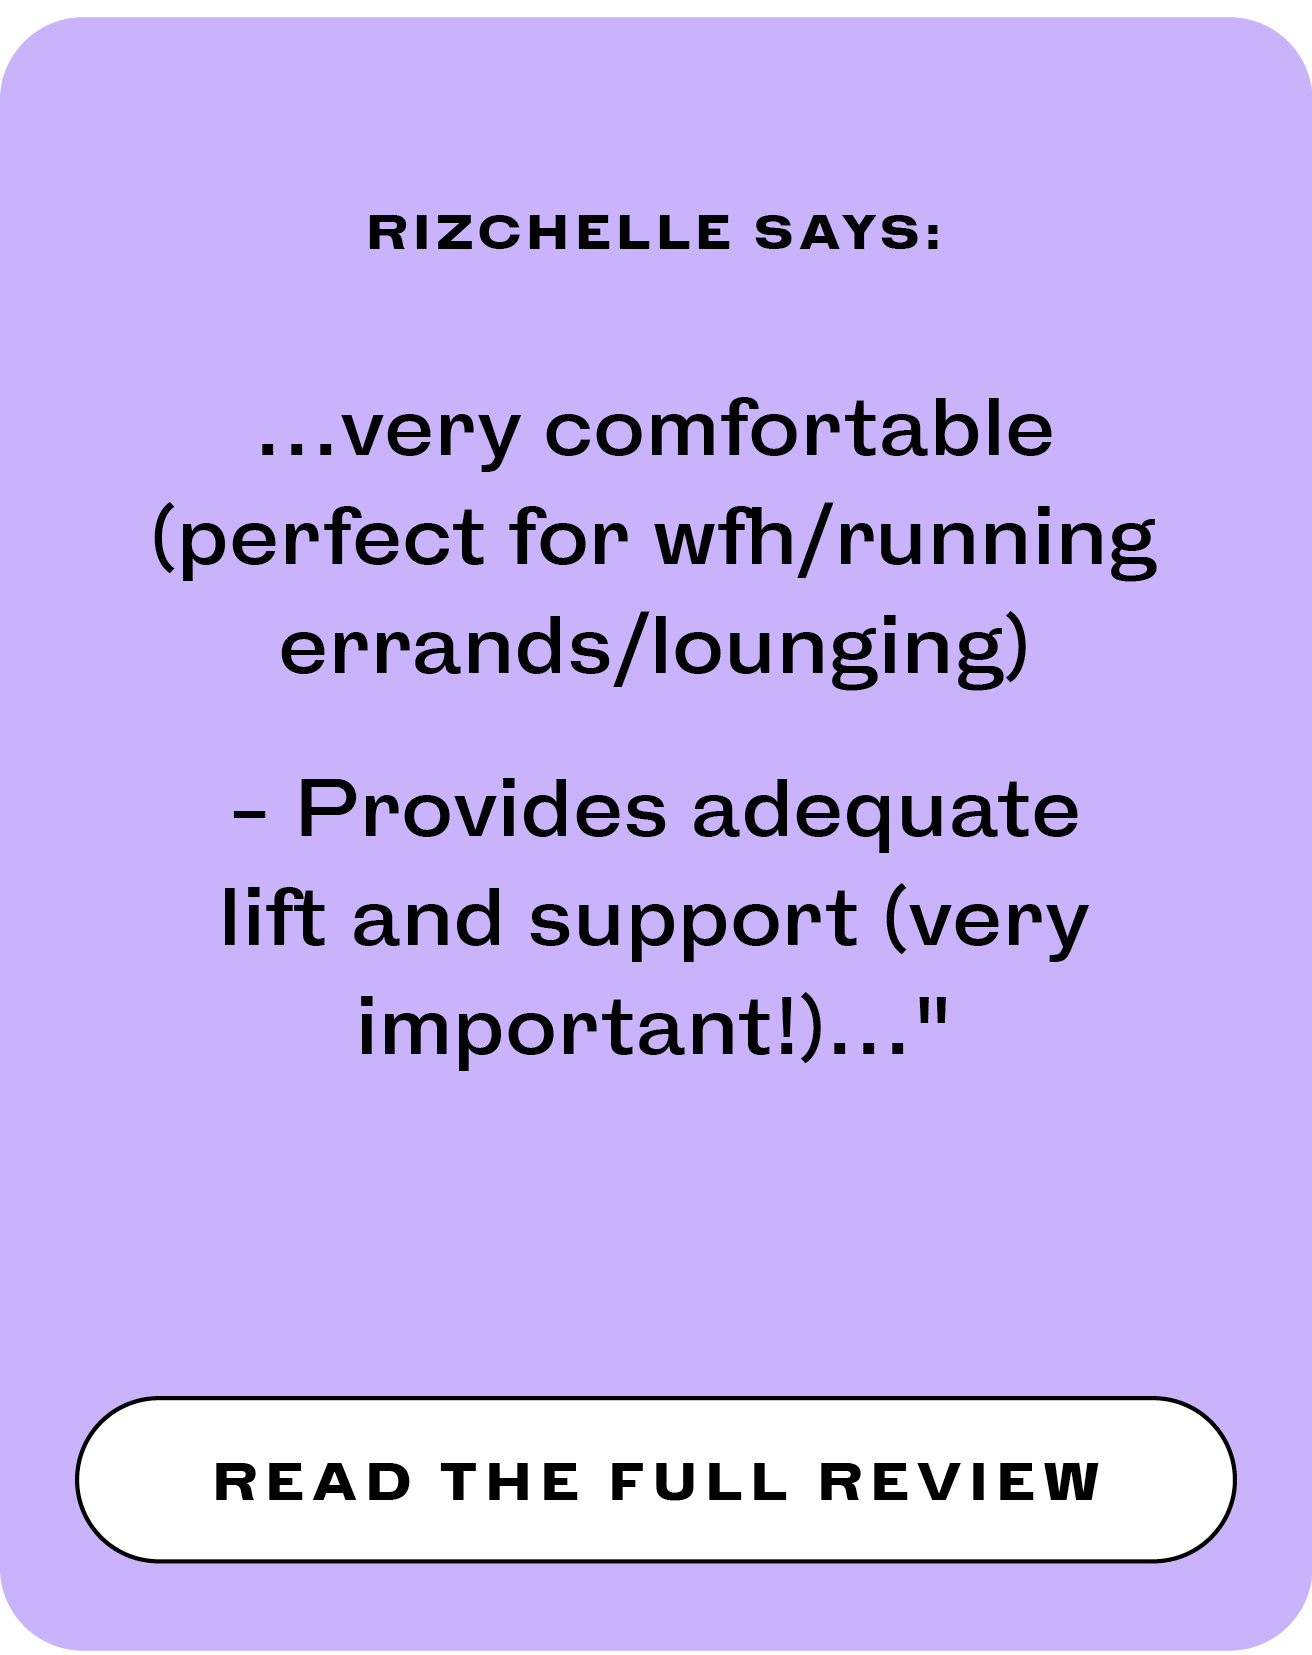 see it on rizchelle review